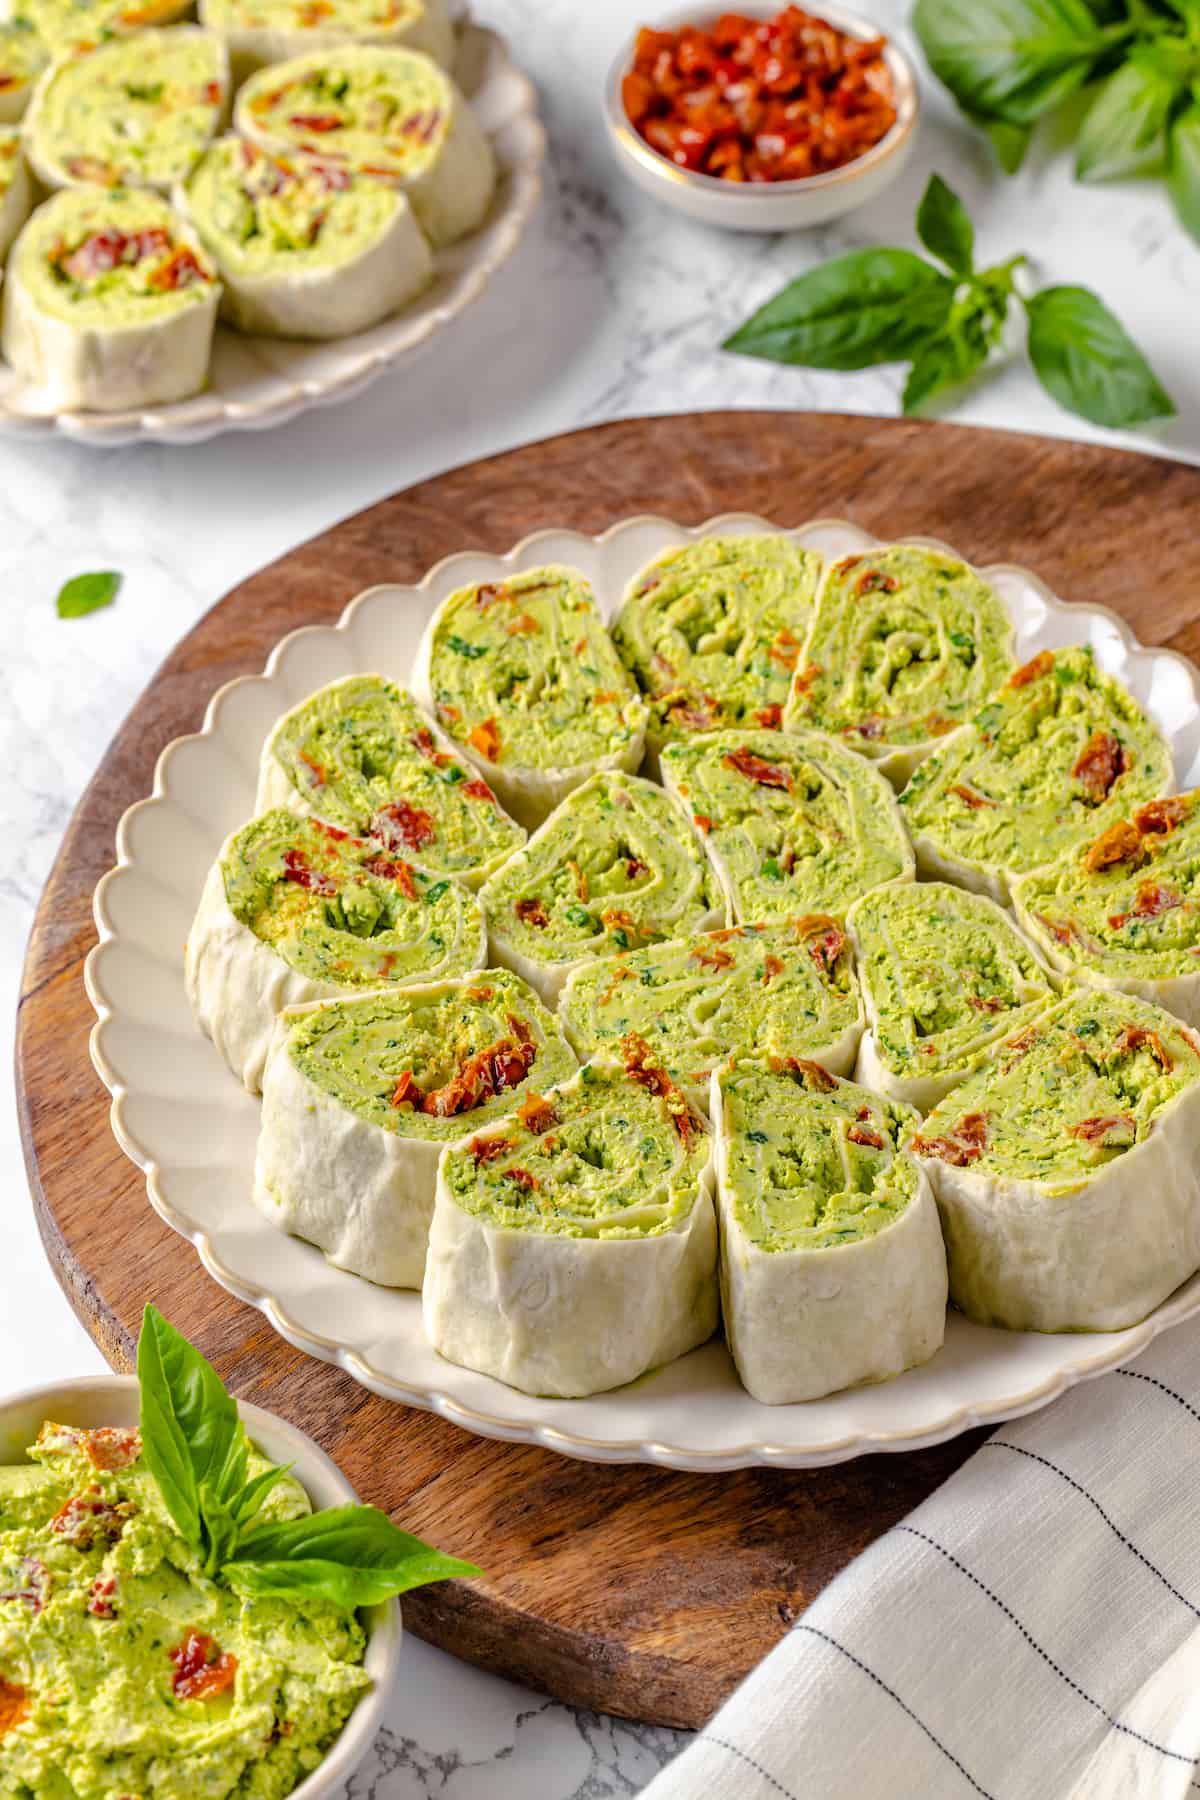 Plate of pesto pinwheel sandwiches with sun-dried tomatoes